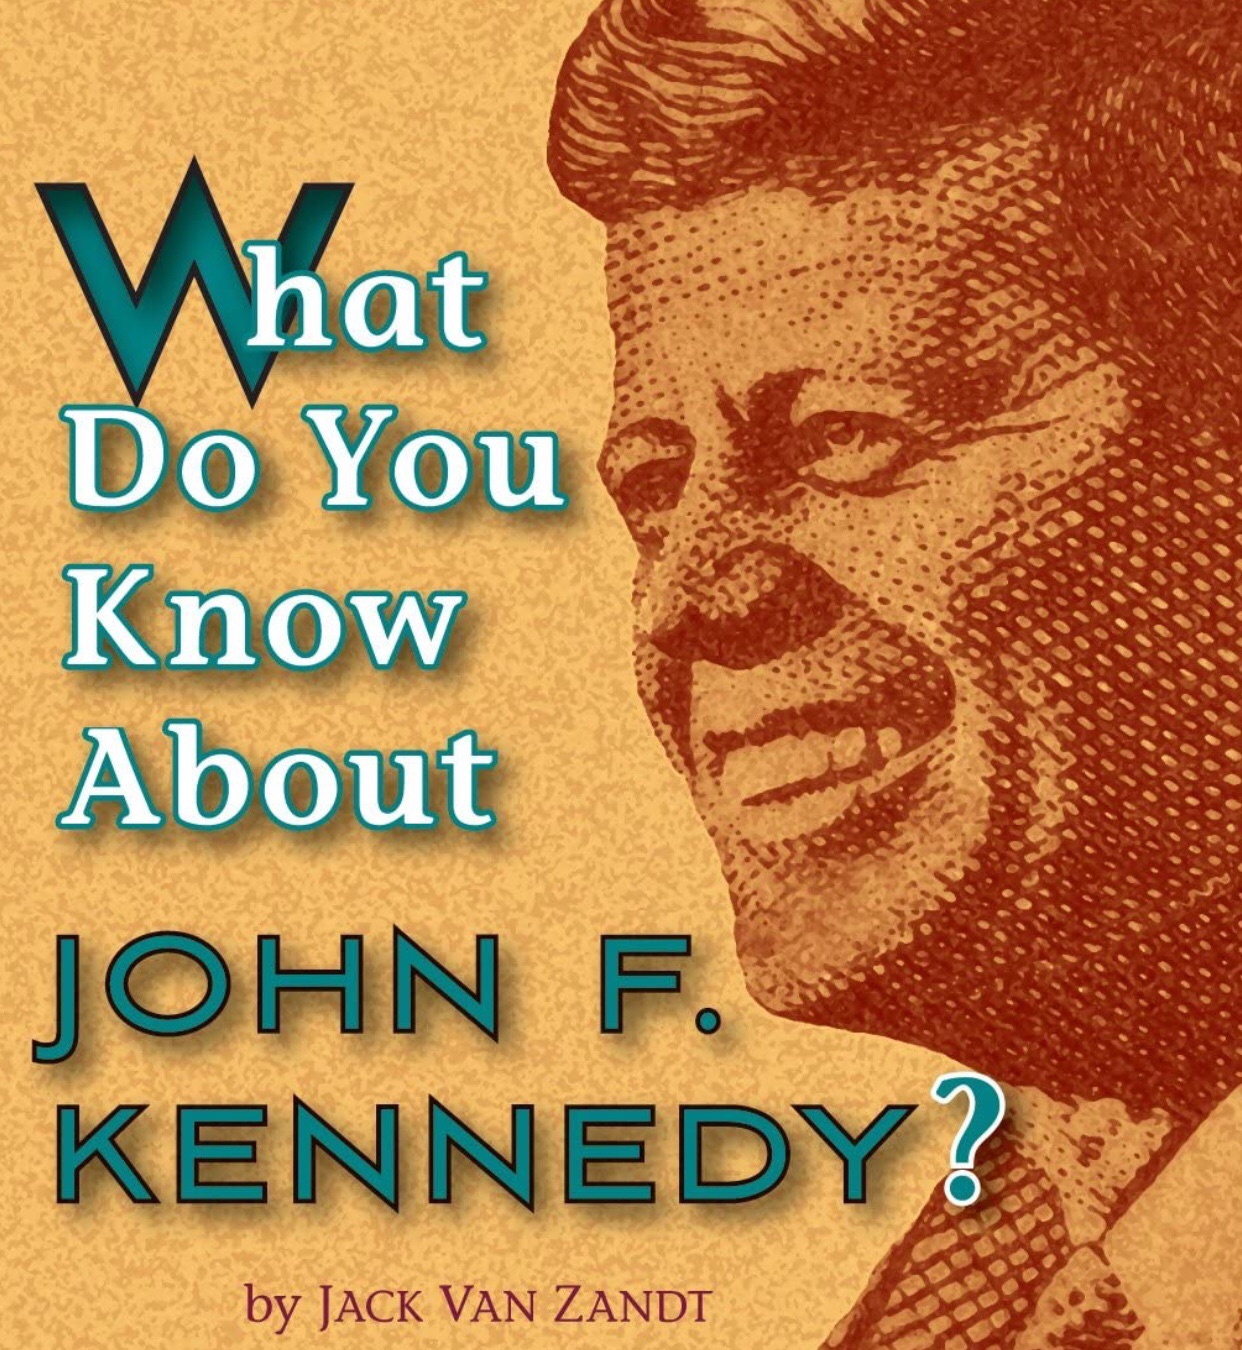 📖🗽What Do You Know About John F. Kennedy? Knowledge Cards Quiz Deck🚀🌖